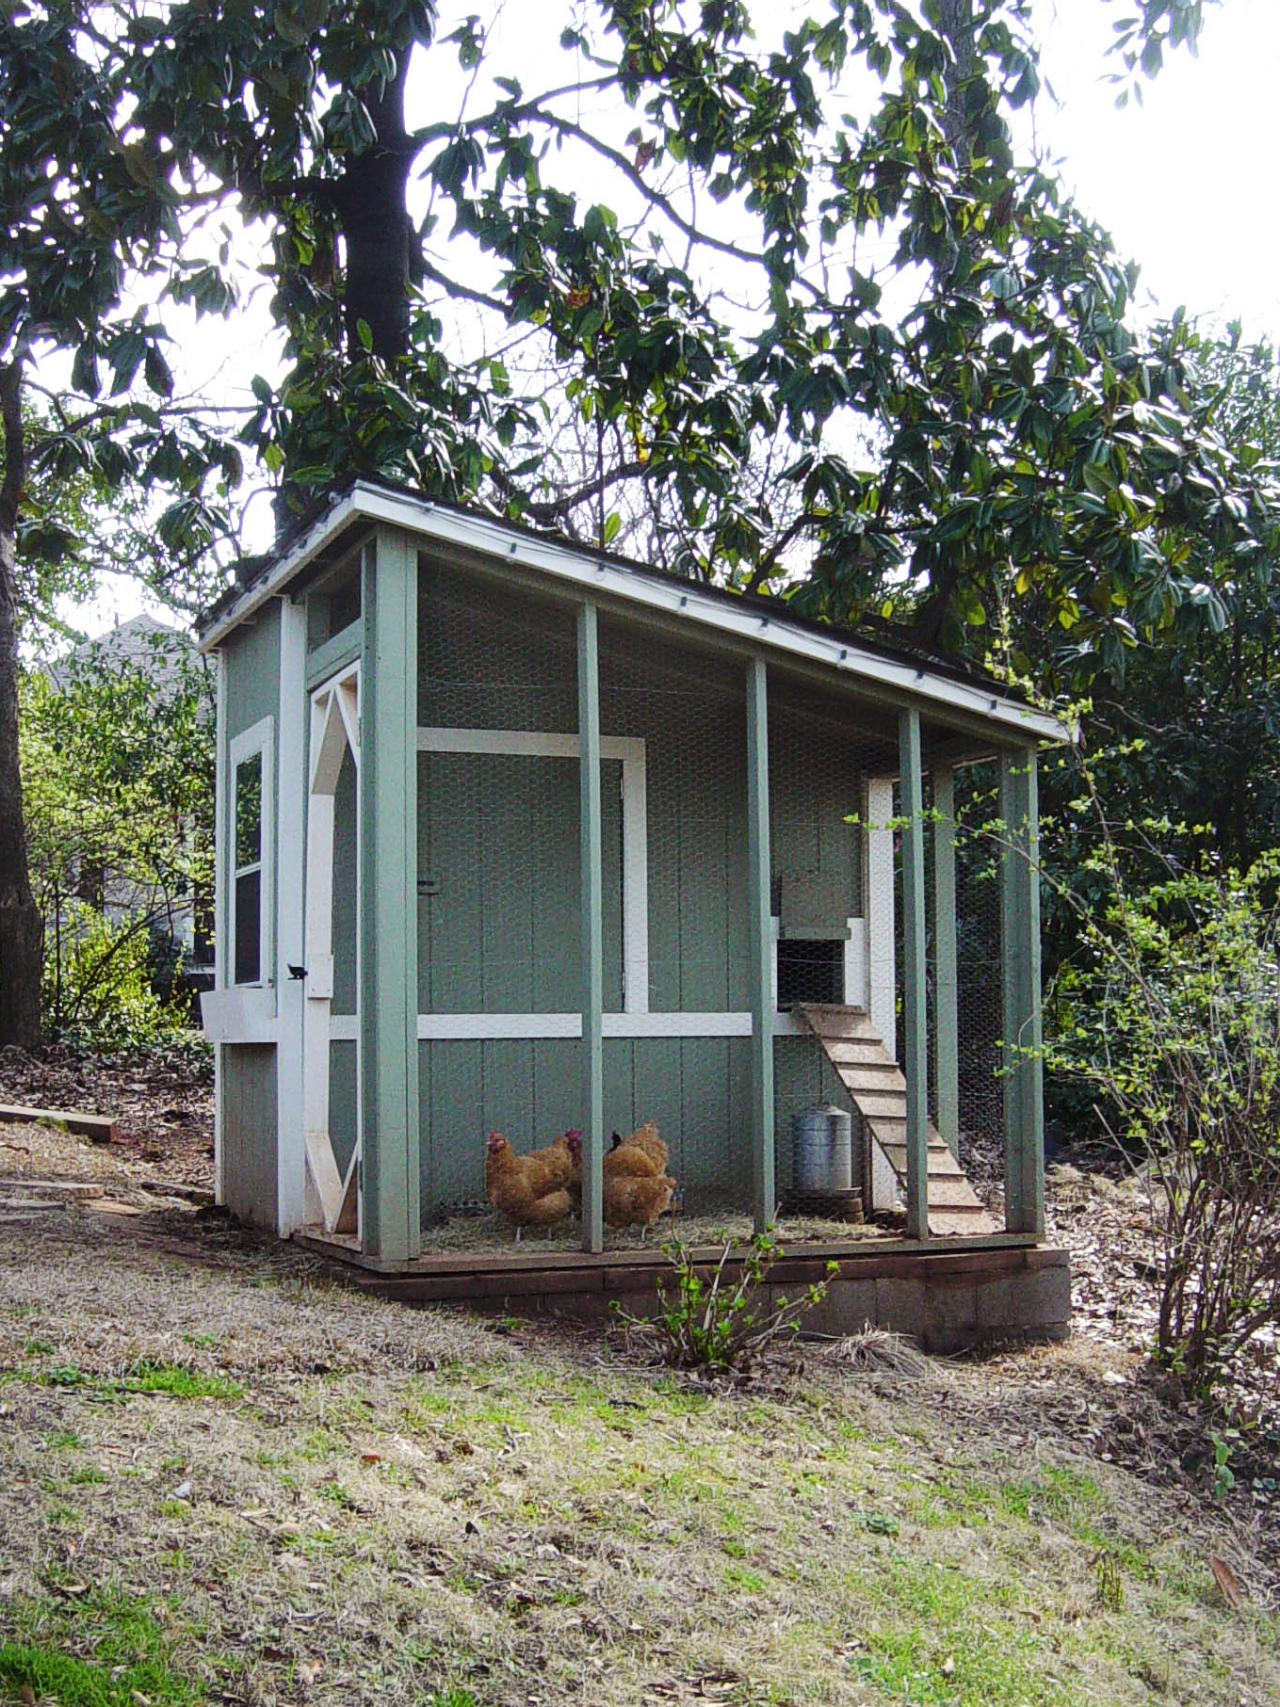 ... building a coop in the style of your own home like these bungalow